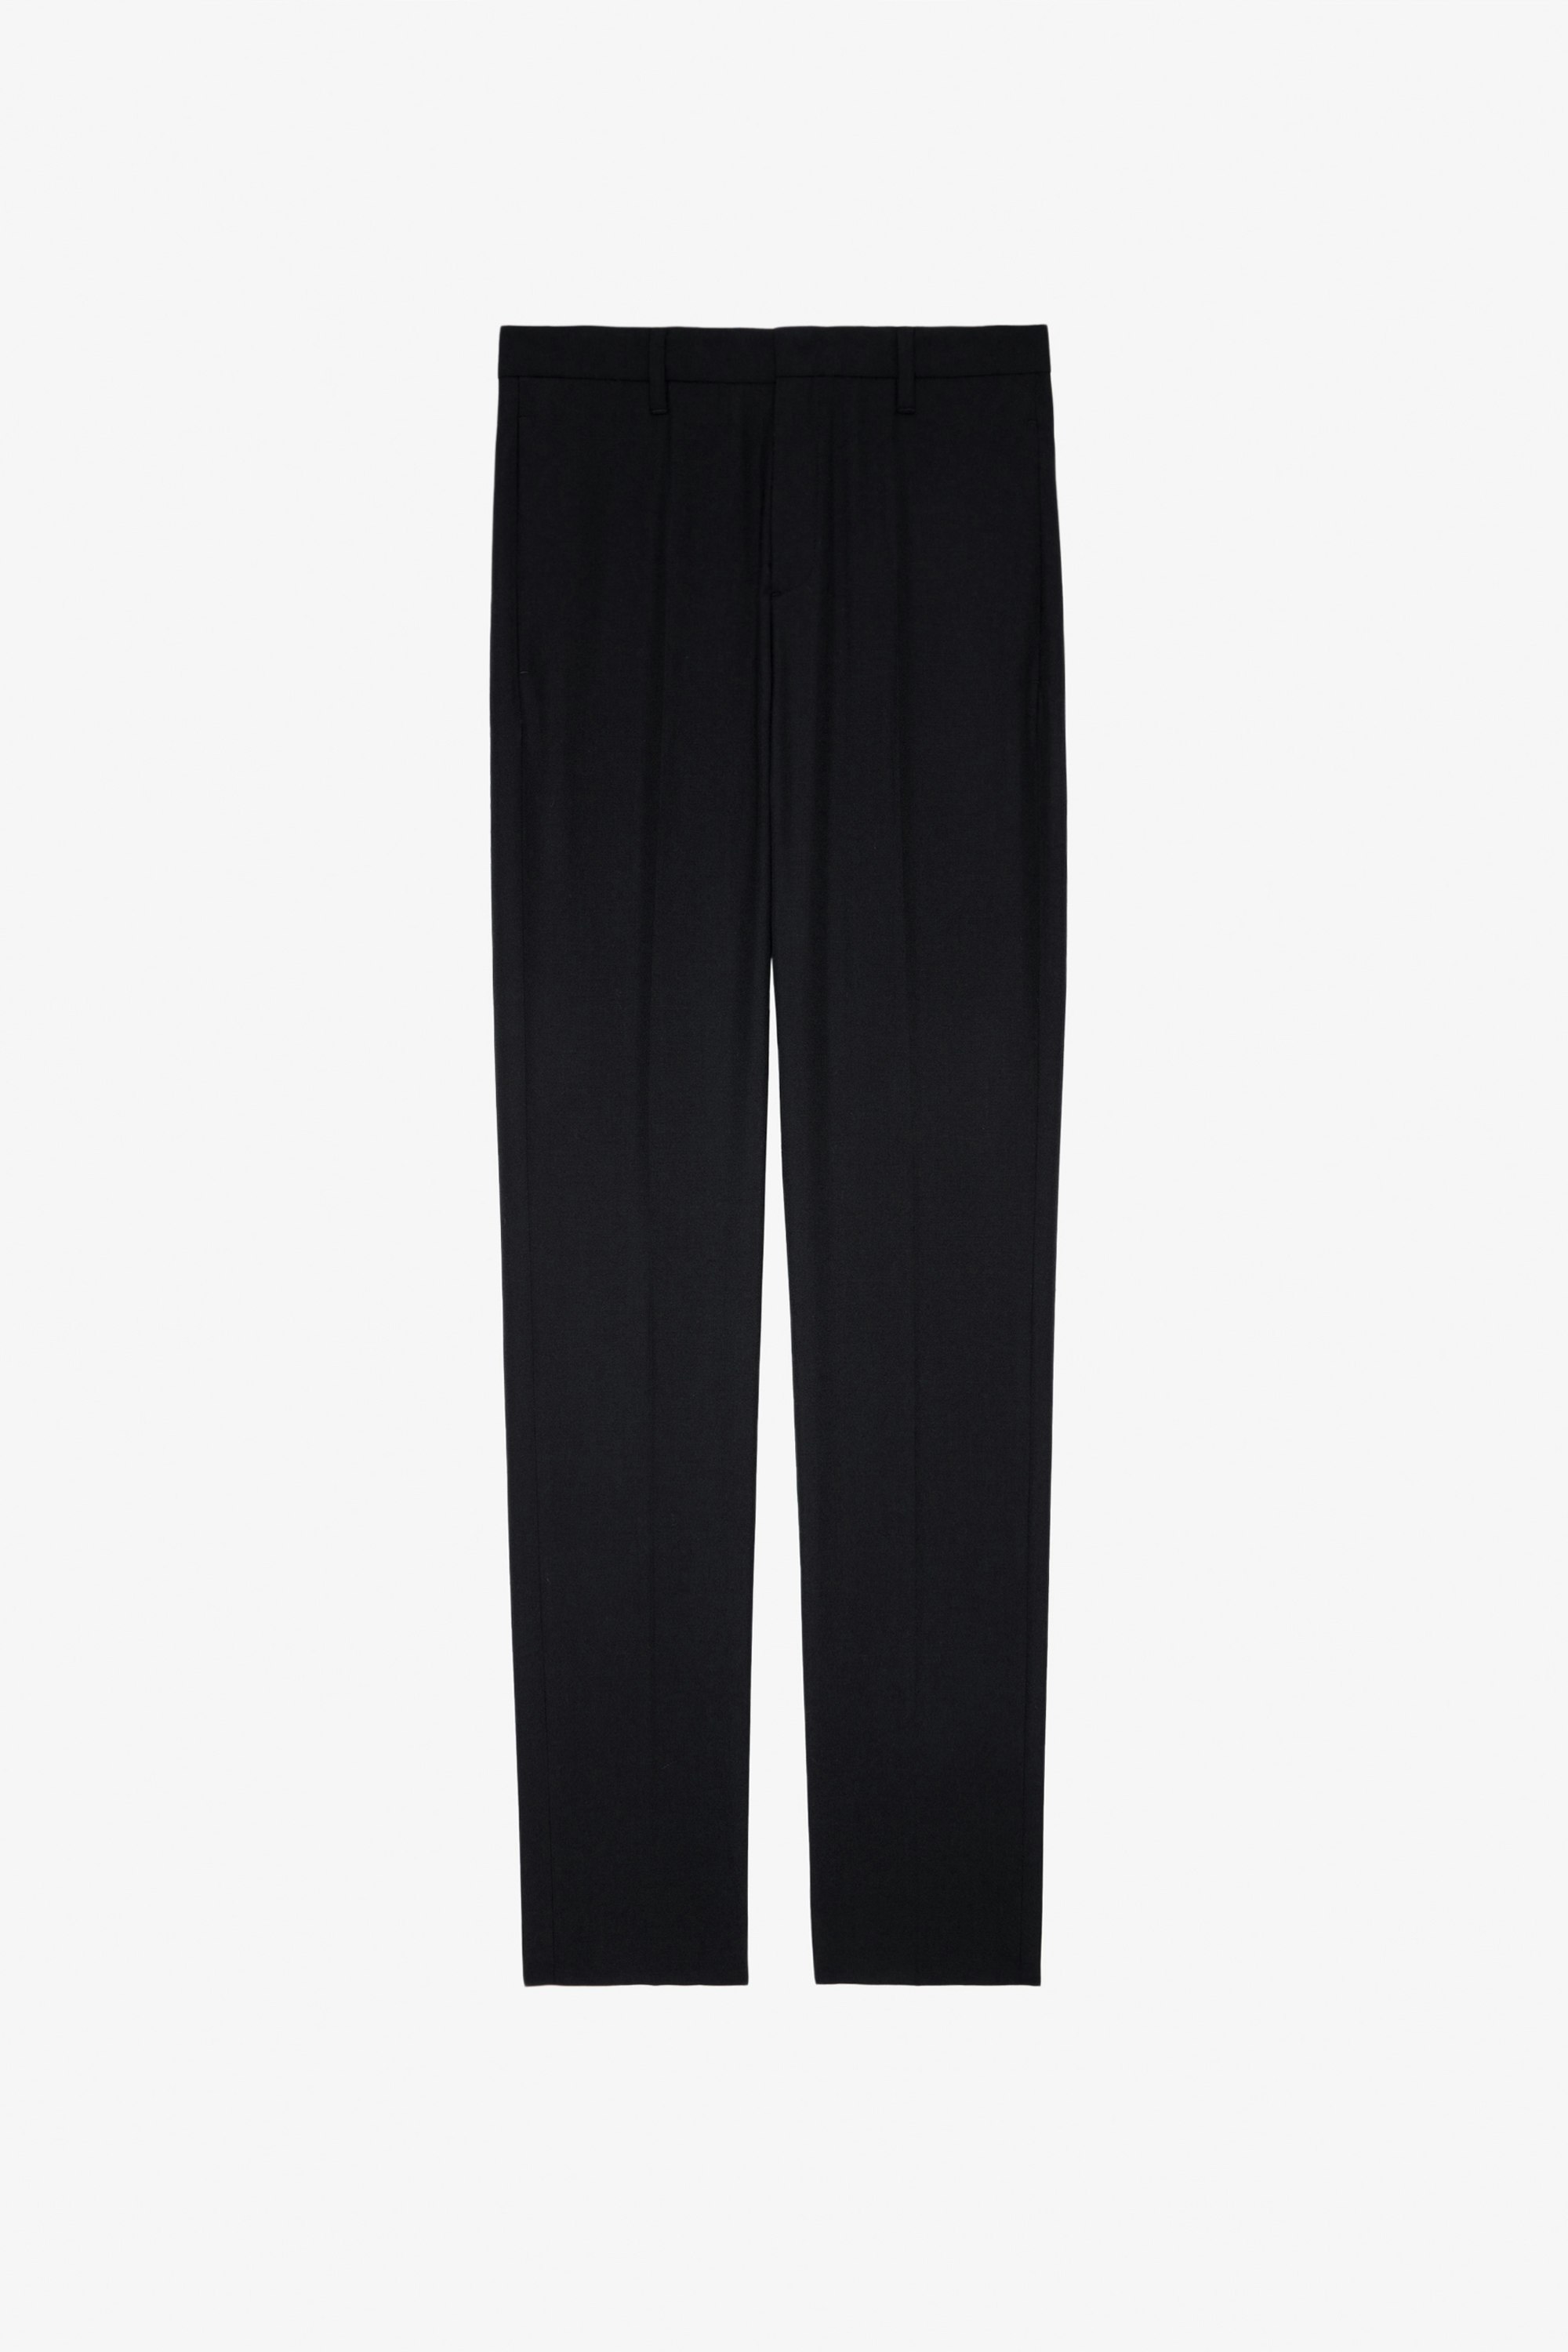 Paris Pants - Unisex tailored black wool pants with studio insignia on back.